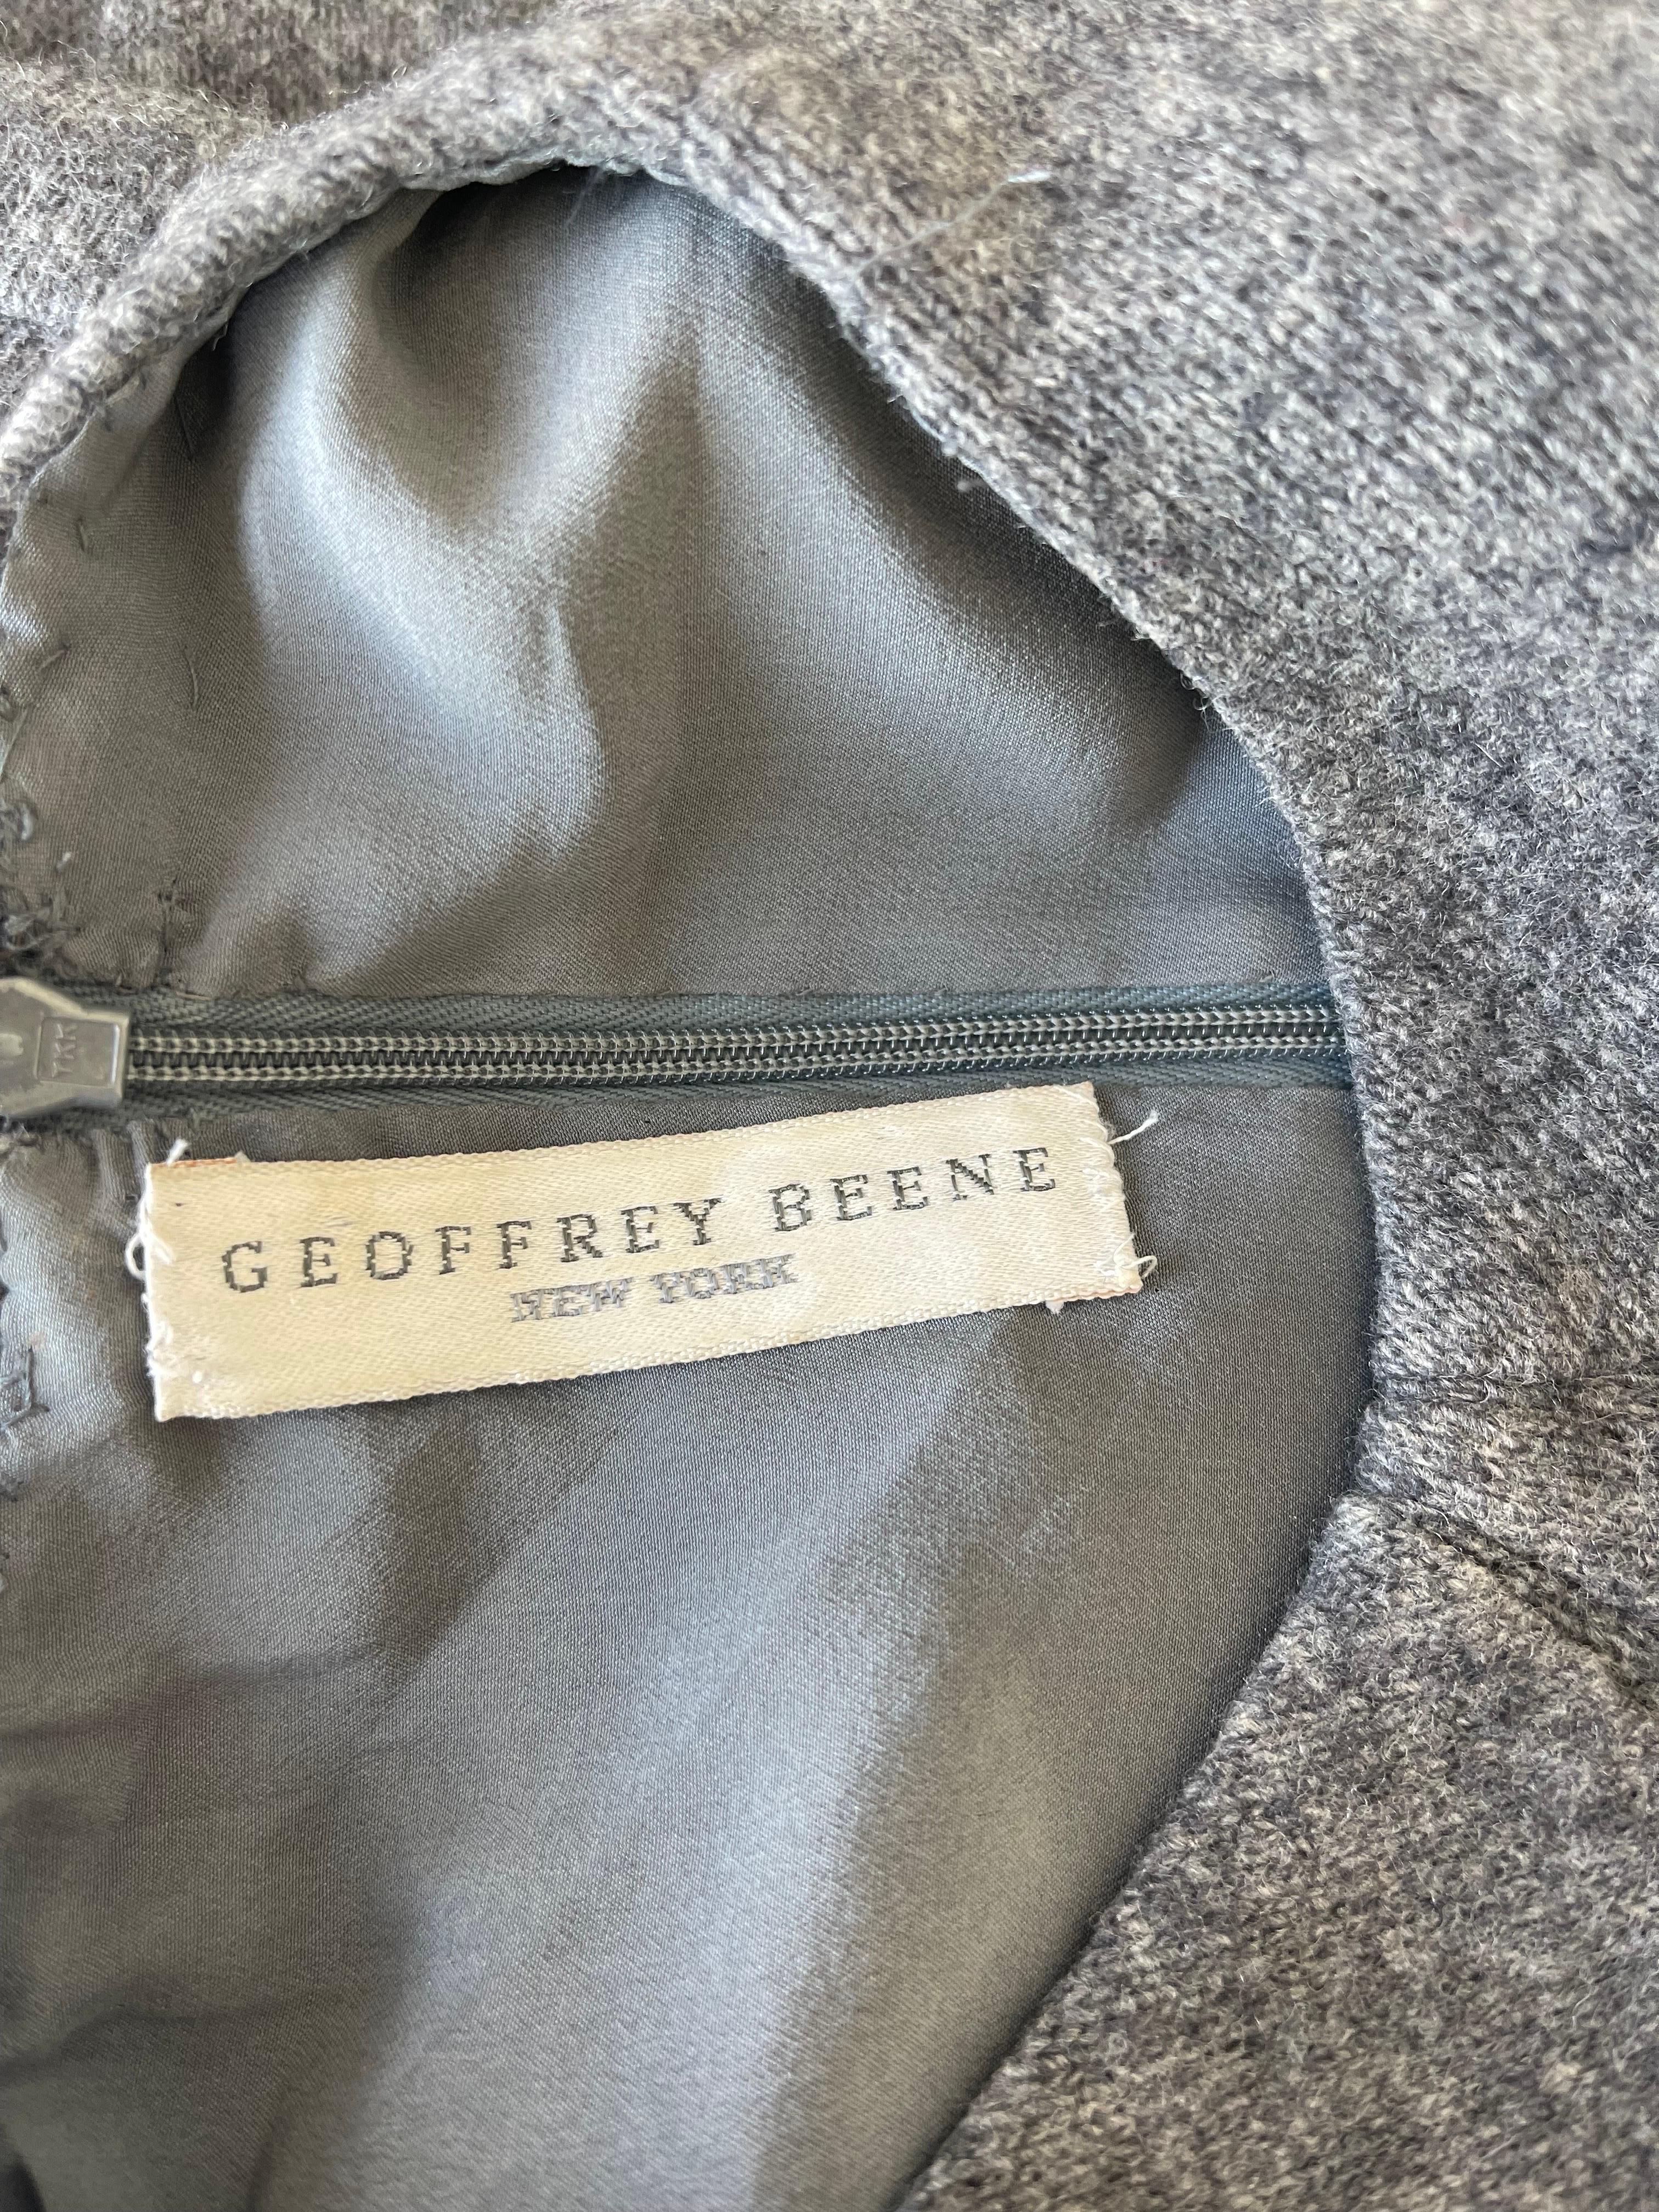 Chic 1990s GEOFFREY BEENE grey wool long sleeve dress ! This is so much more than just a grey dress. This special beauty has so many flattering lines. Couture quality, with the majority of finishings completed by hand. Tailored bodice with hidden